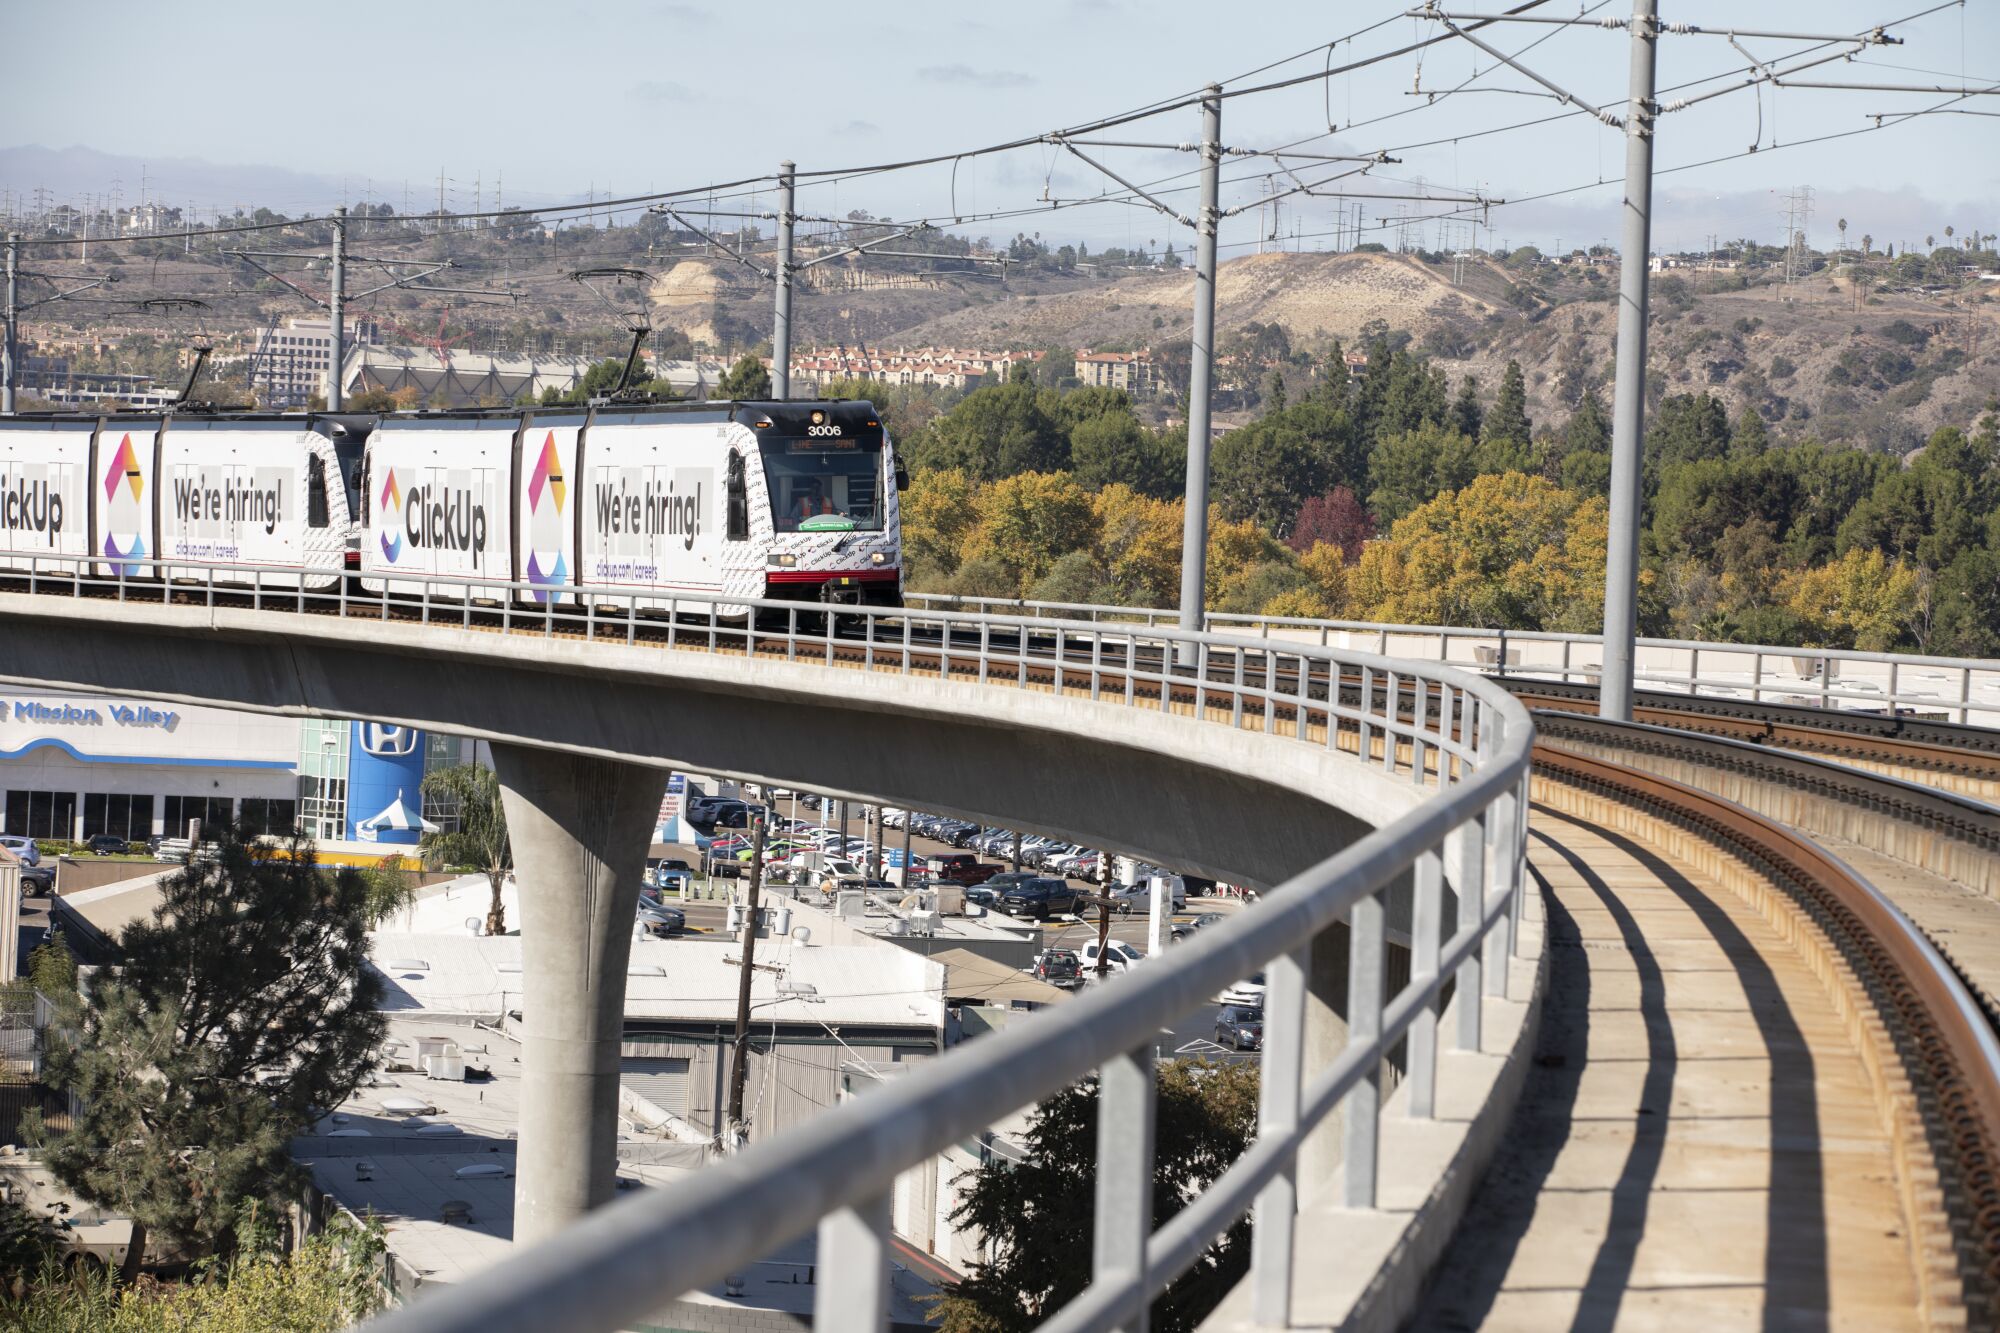 The San Diego Trolley's green line arrives to the Grantville station on Wednesday, Nov. 10, 2021 in San Diego, California.